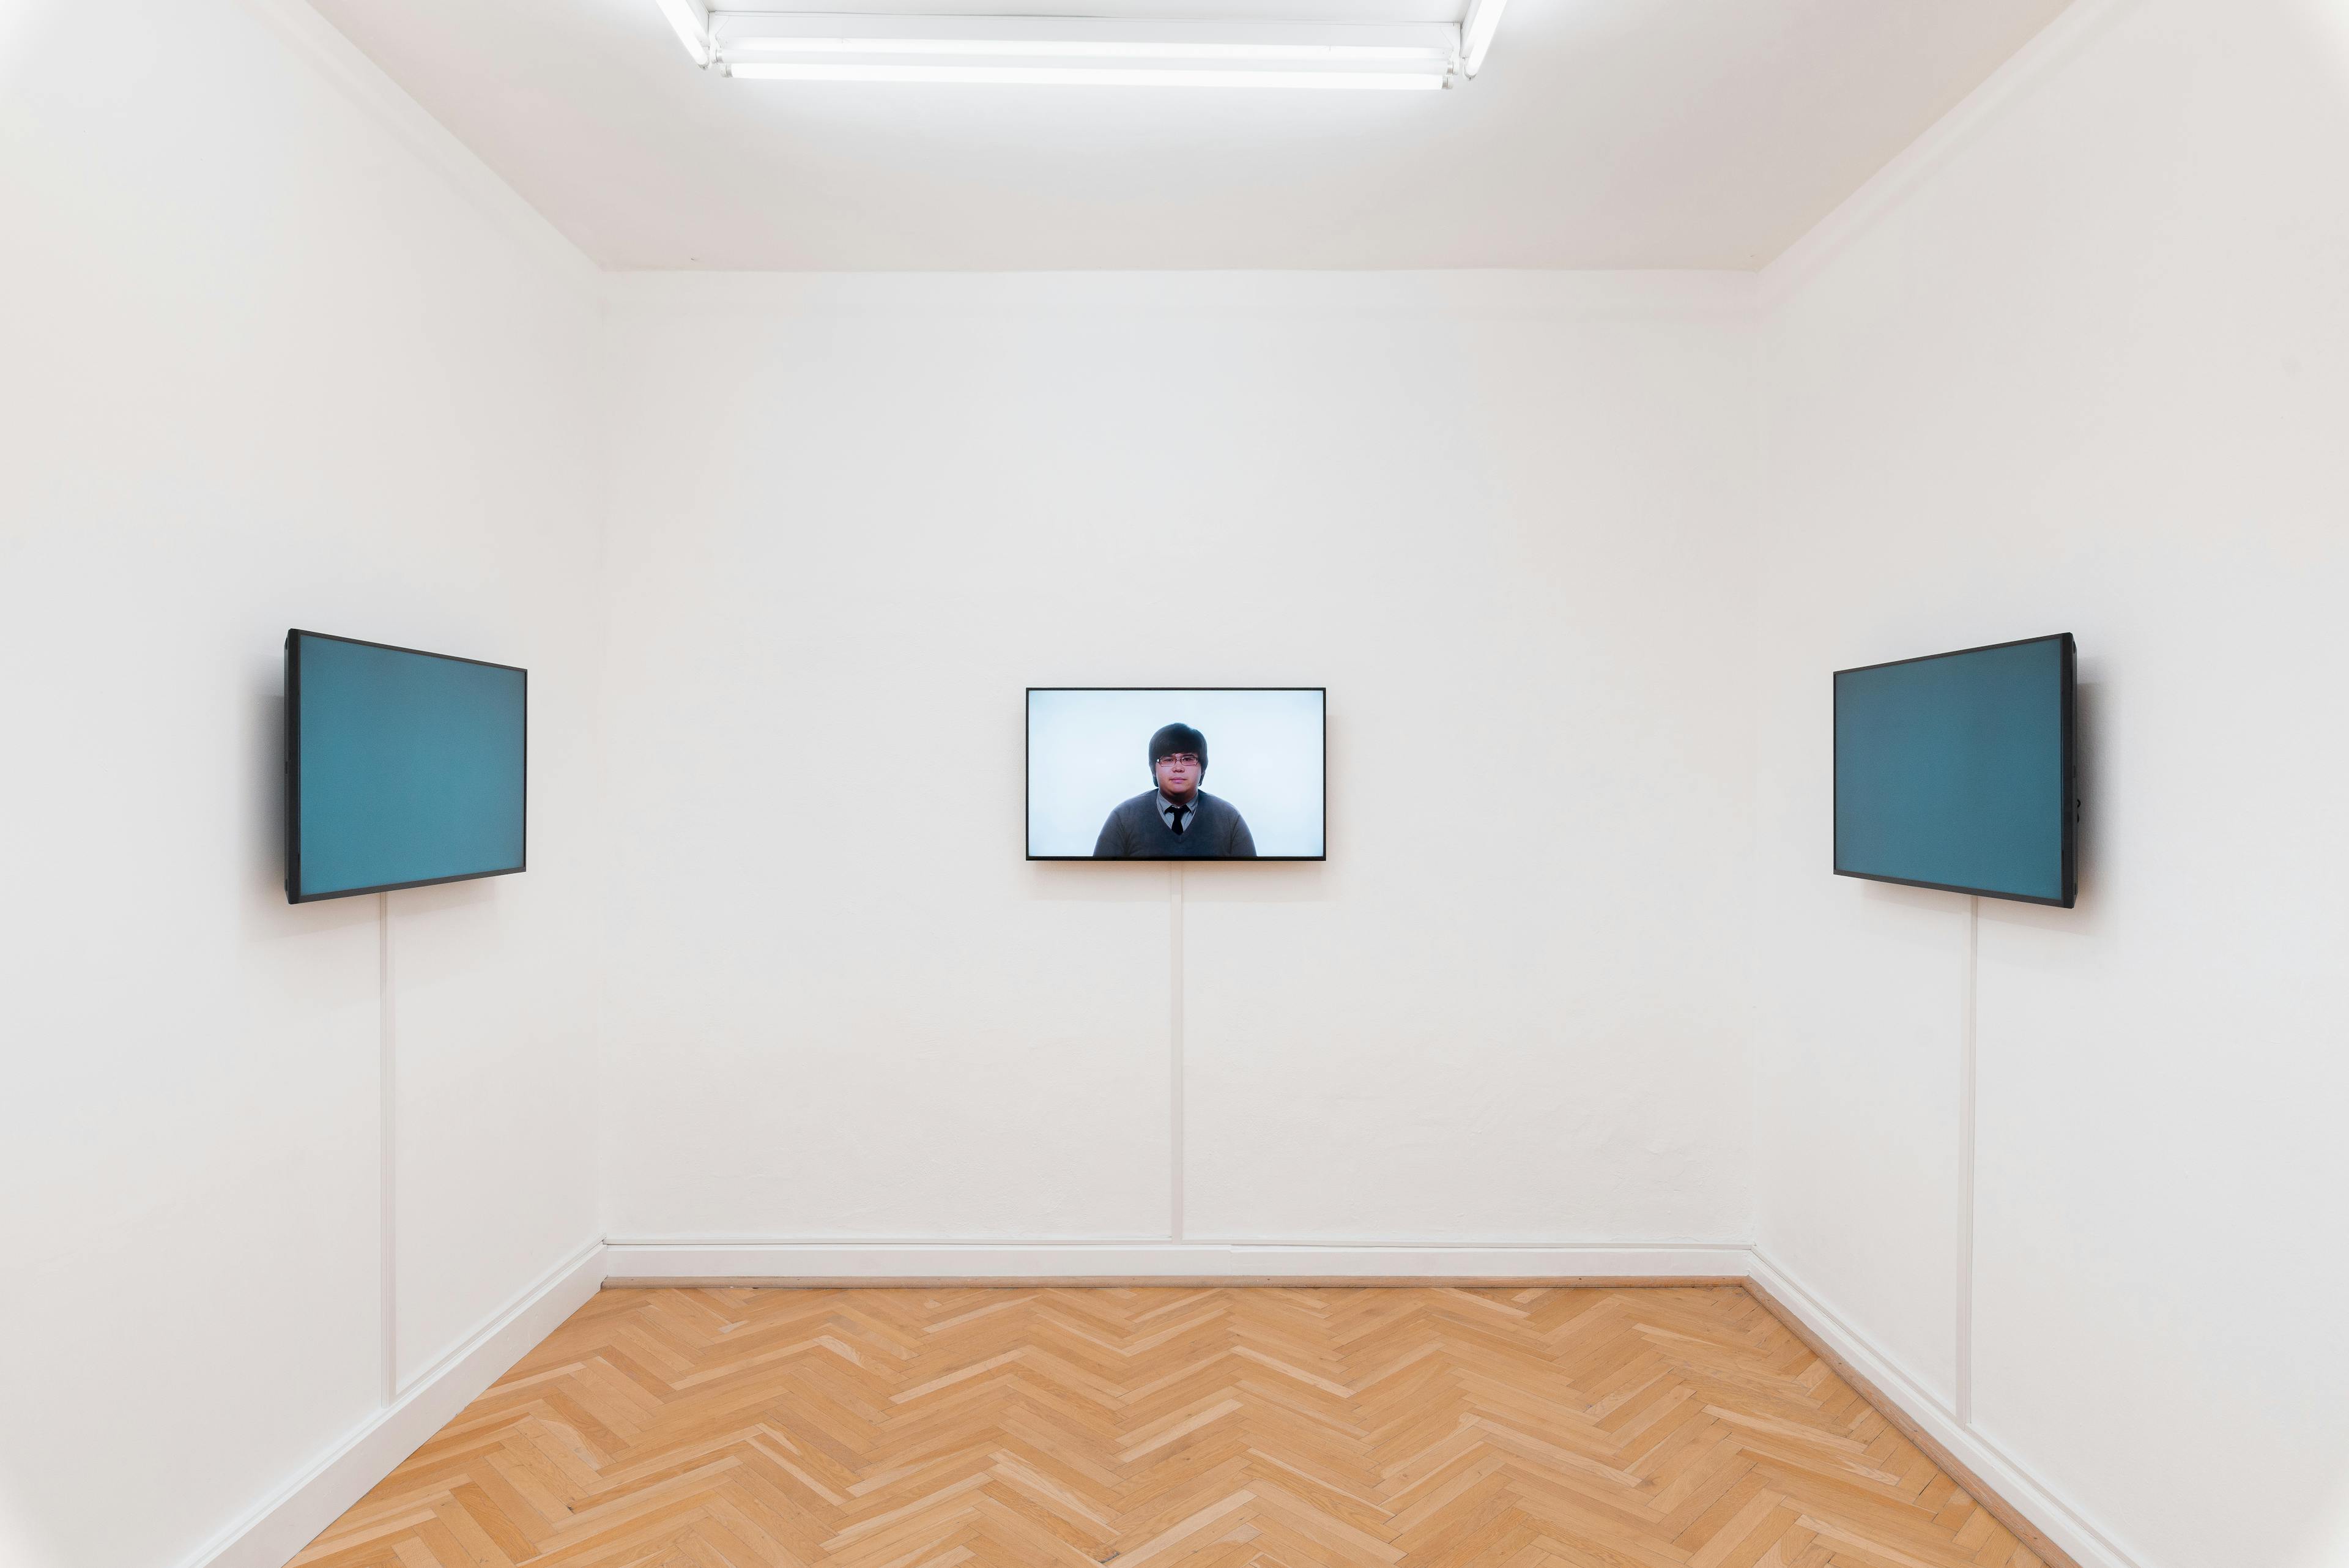 A small gallery room with three monitors on three walls. On the centre back wall, the monitor plays a video of a talking head. On the parallel walls, two monitors with blue screens face each other.